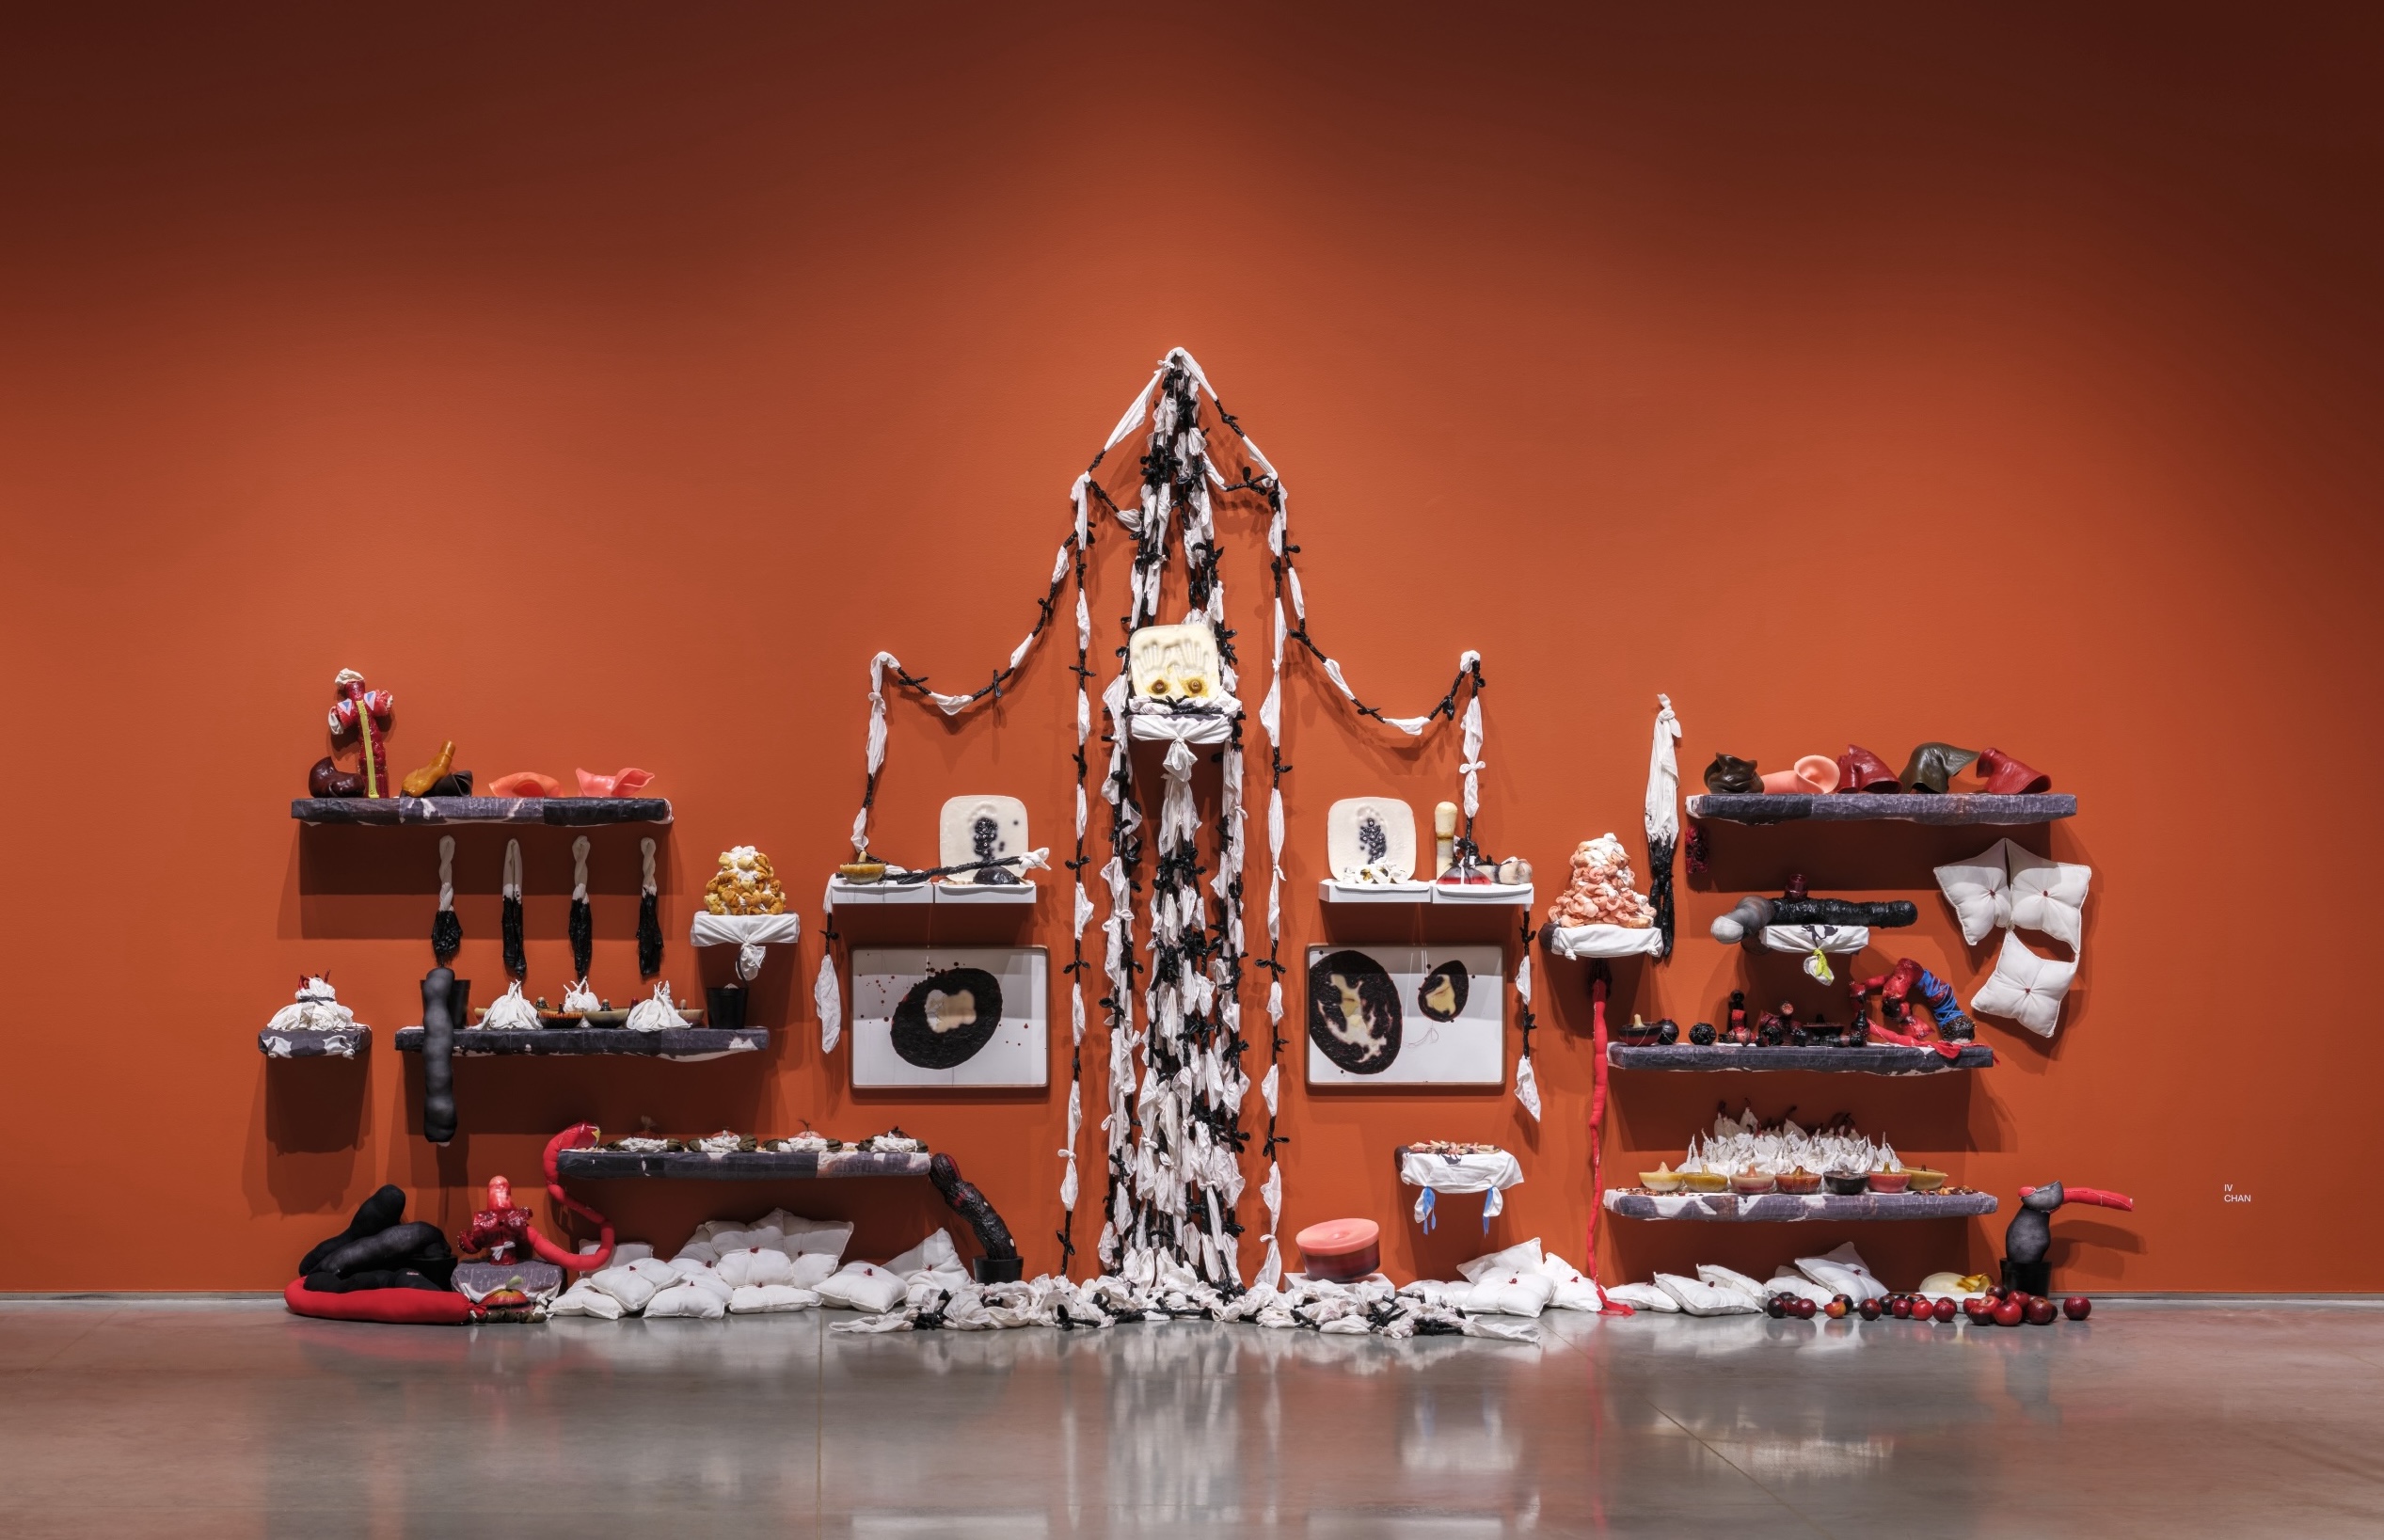 Mixed media installation resembling a shrine with soft sculpture, pillows, fabric chains, and wax molds.